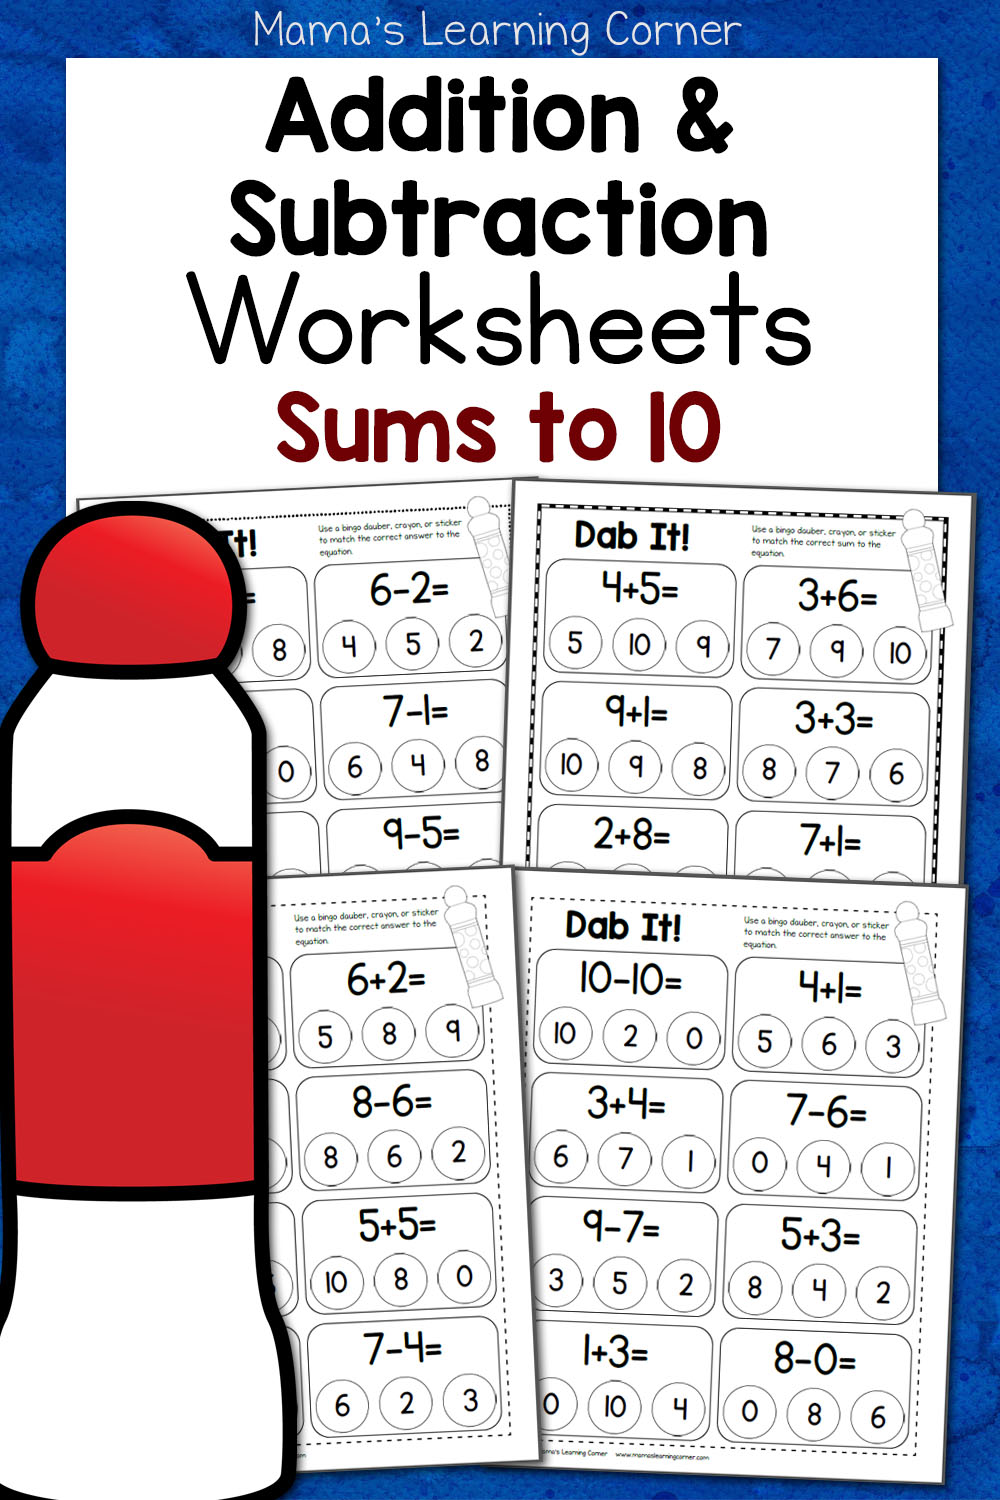 Dab It! Addition and Subtraction Mixed Worksheets